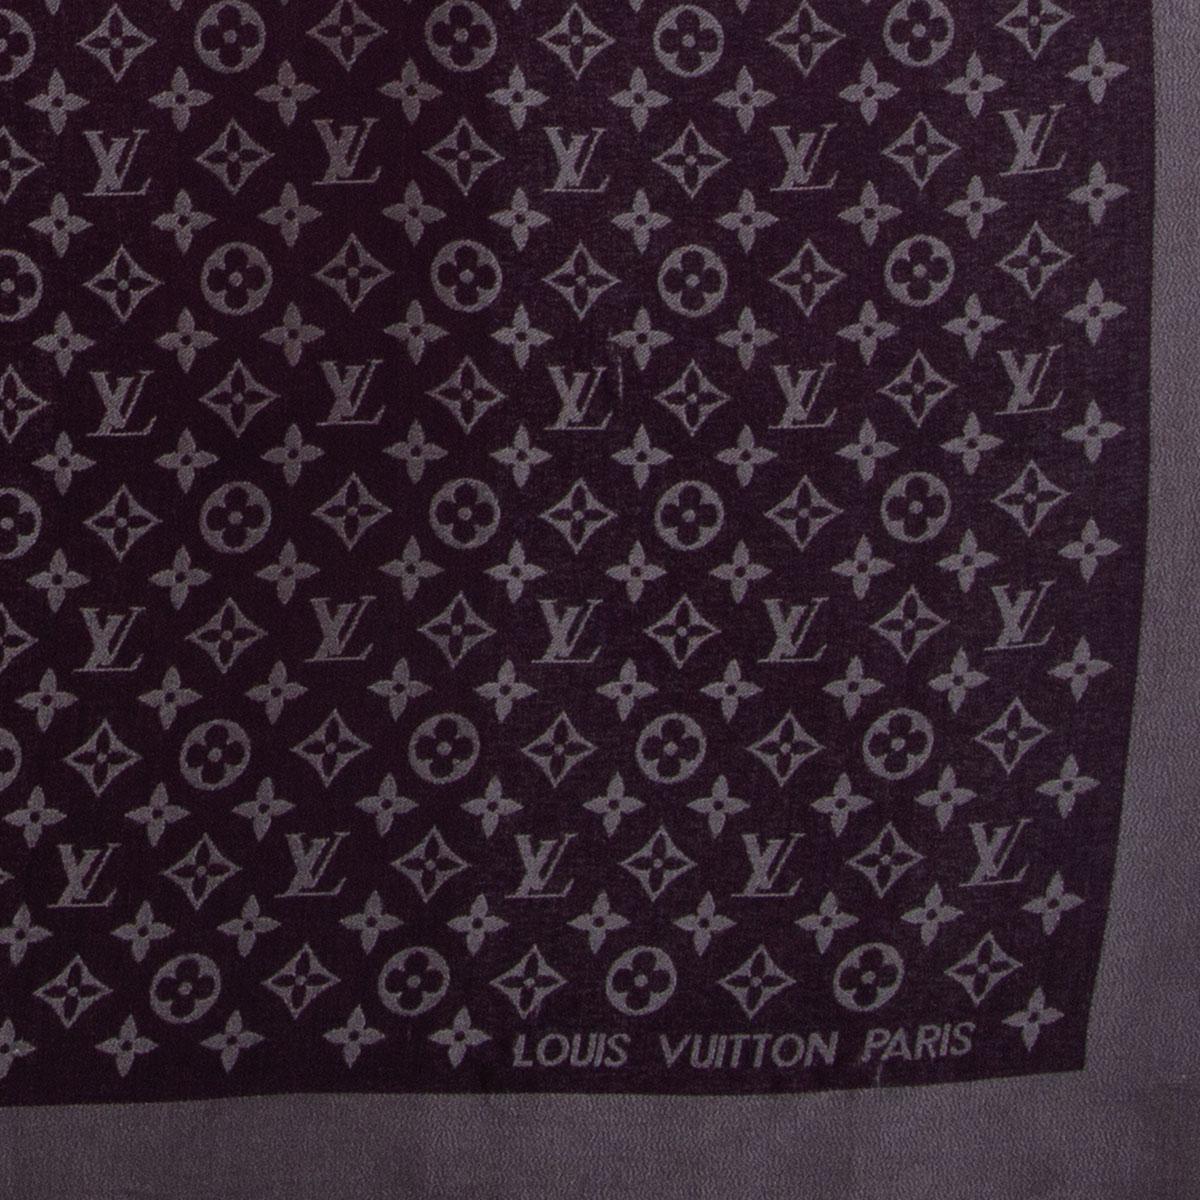 100% authentic Louis Vuitton Monogram Shine shawl in purple and metallic silver silk (50%), metal (30%) and wool (20%) jacquard featuring fringe finish. Has been worn with a drawn thread that is visible. Overall in excellent condition. 